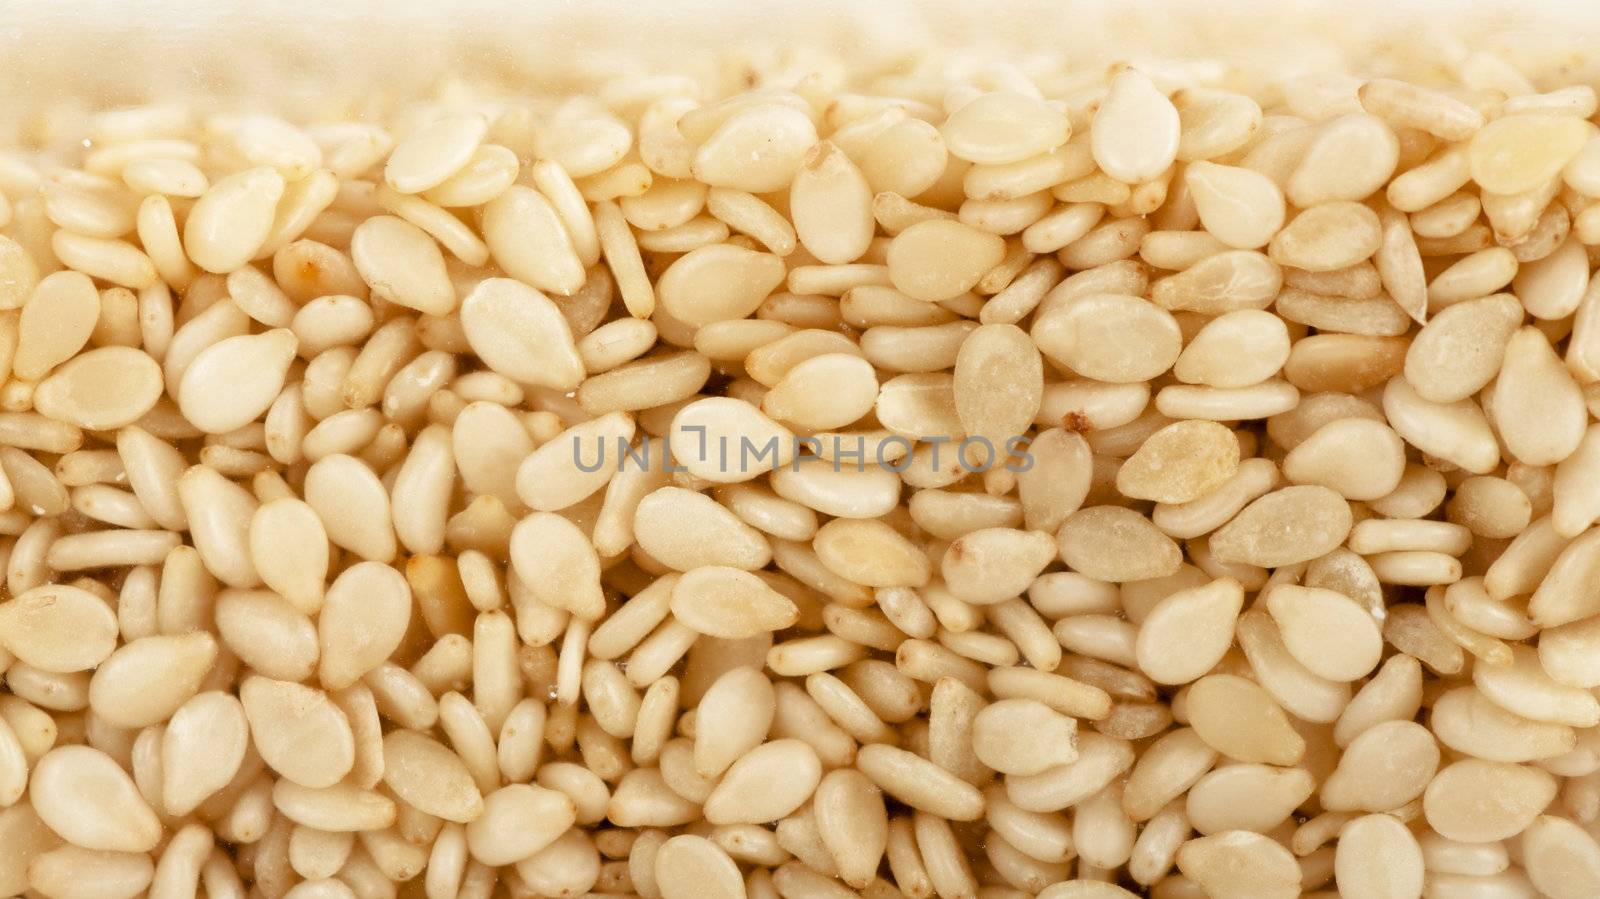 Macro view of a heap of sesame seeds behind glass